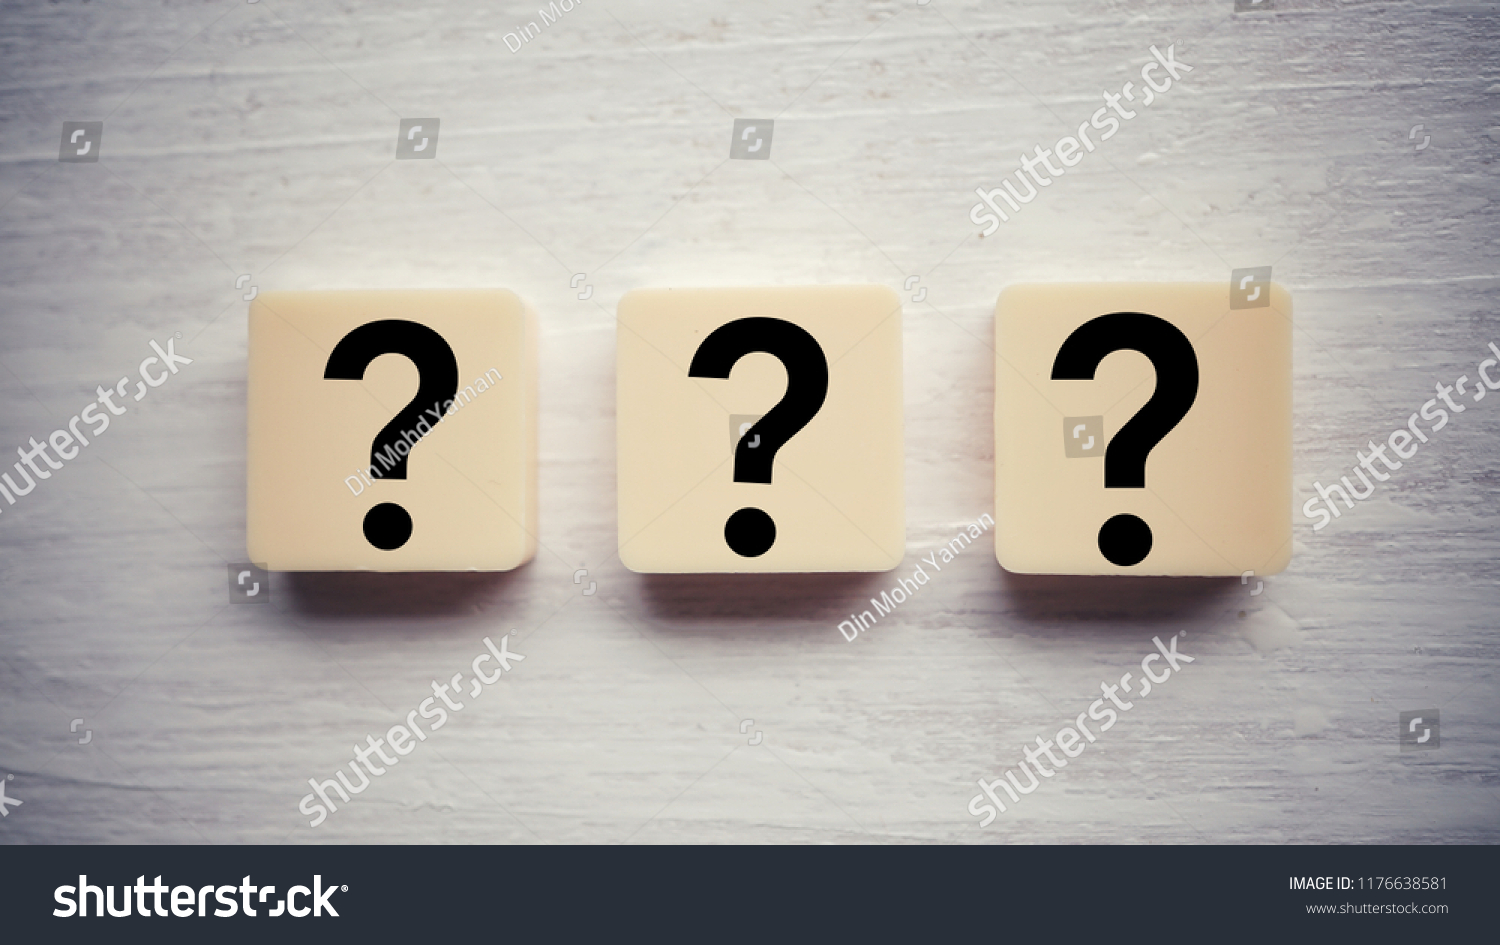 Question mark on alphabet block. Question mark over wooden background #1176638581